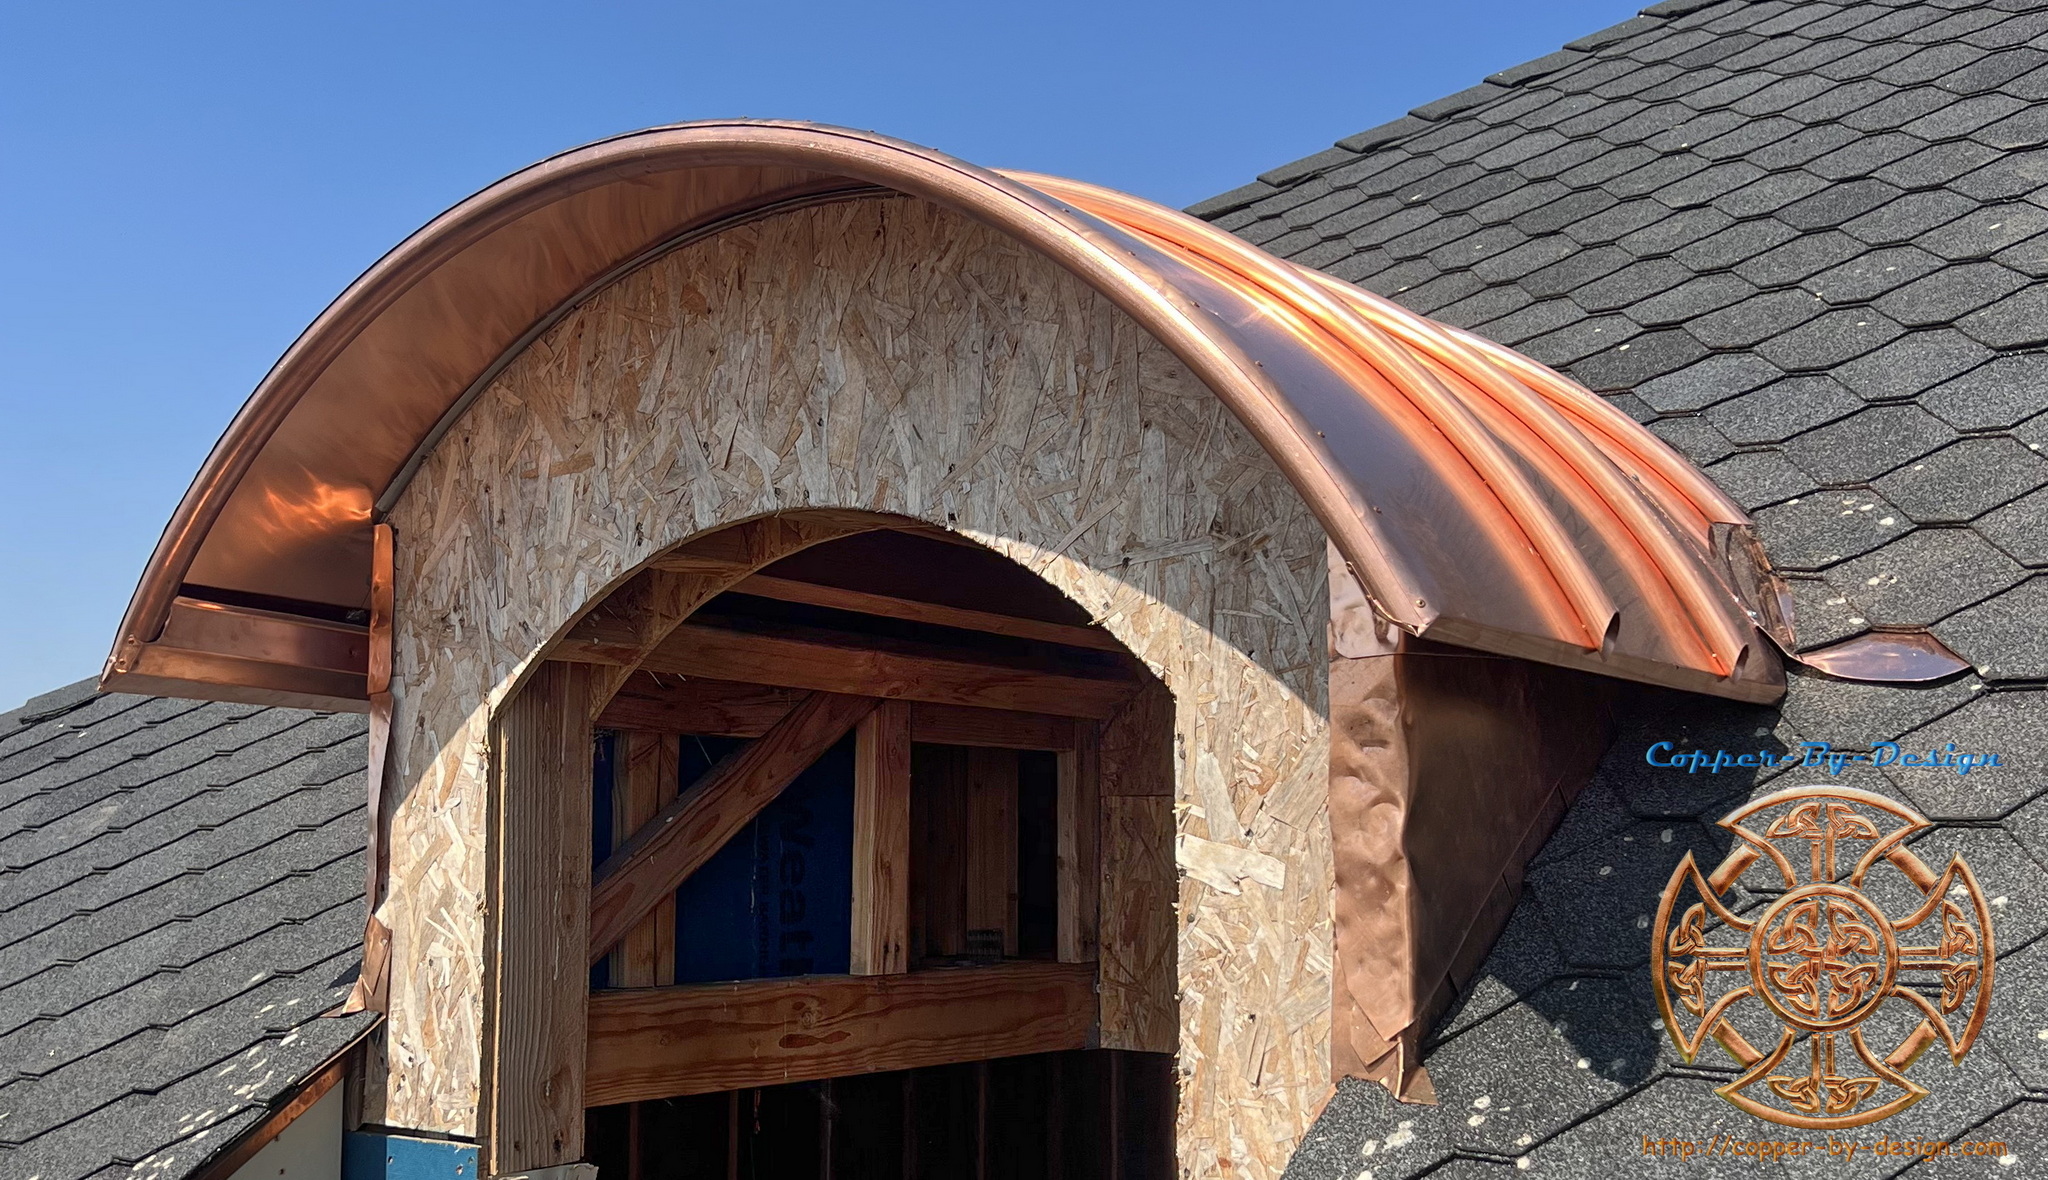 CBD's Custom Copper Roof Covering Pages